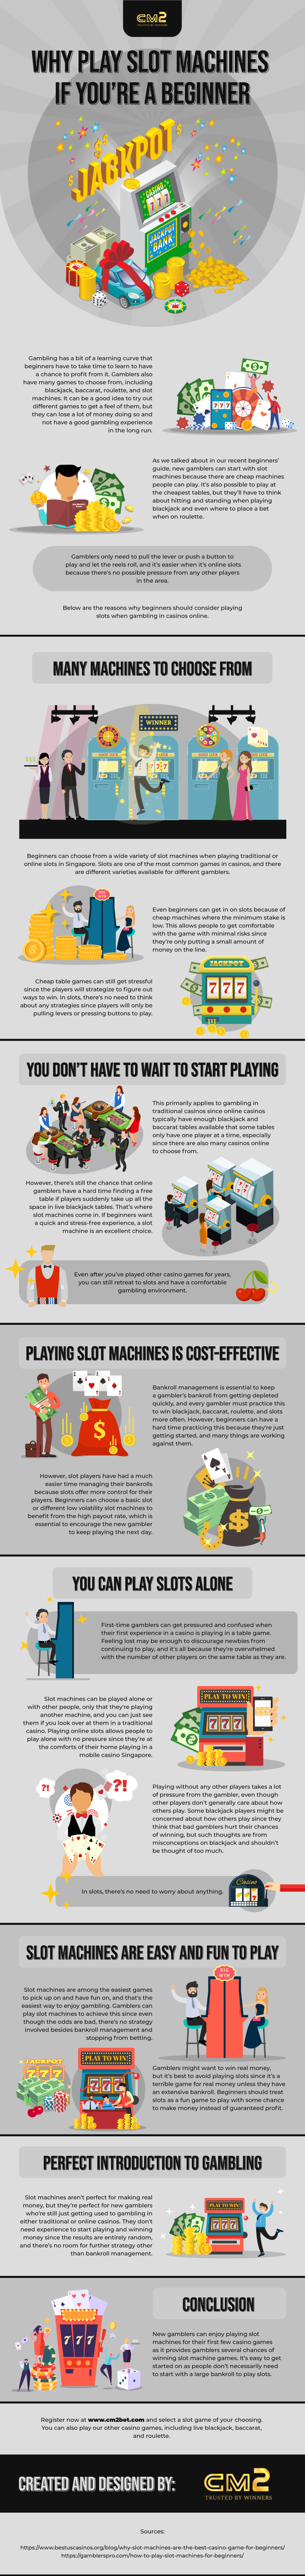 Why Play Slot Machines If You’re a Beginner